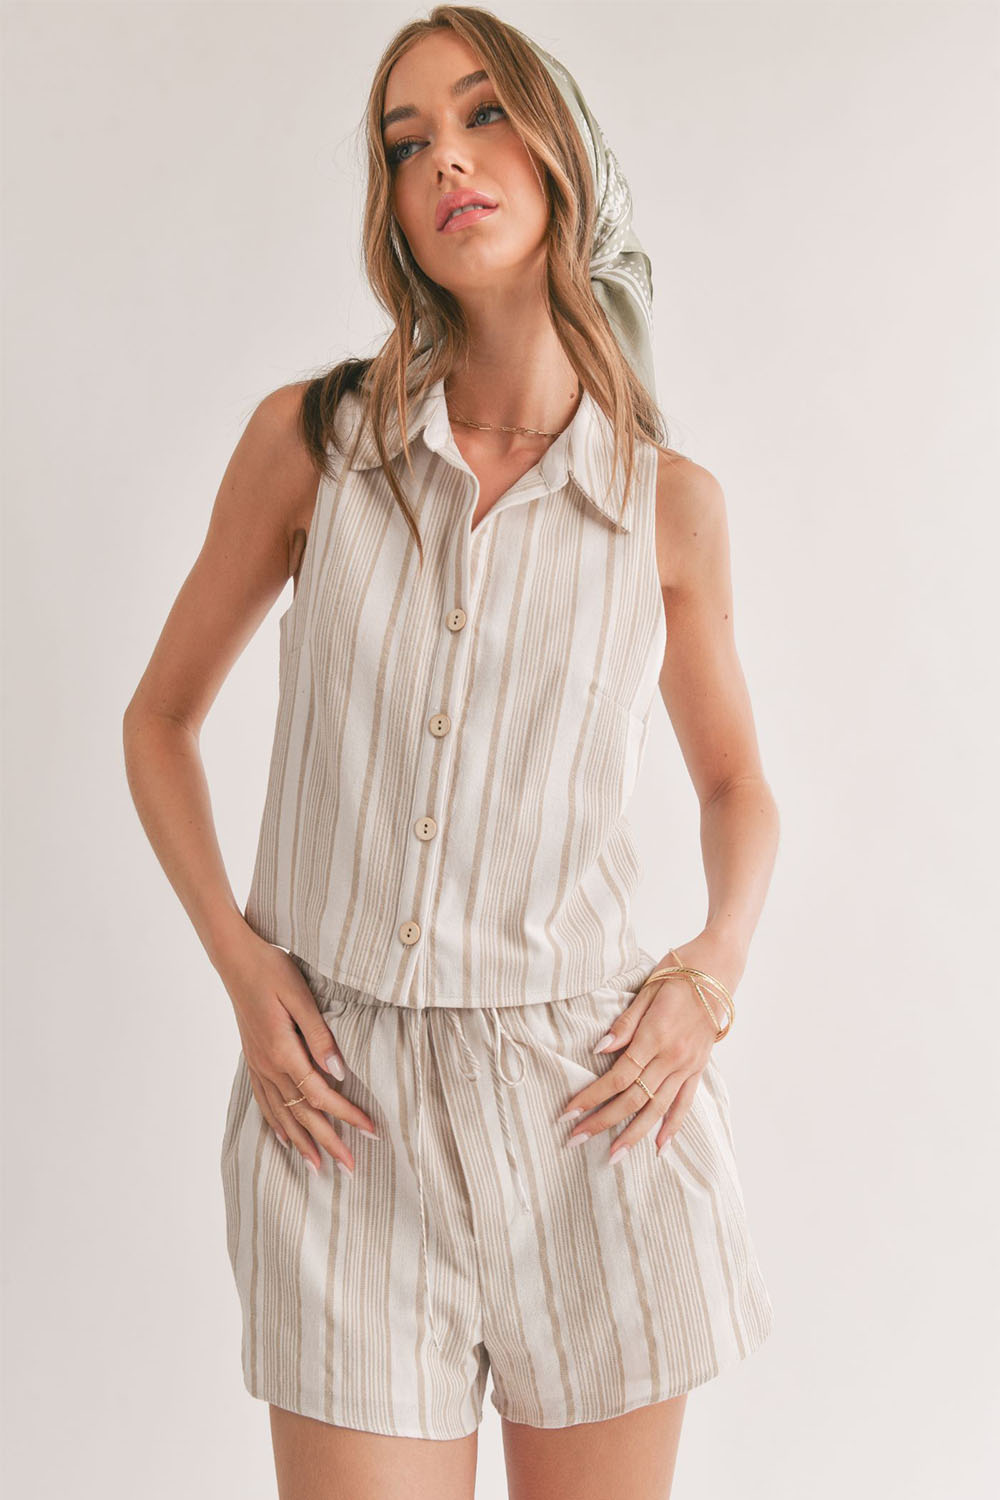 Sage the Label - Harmonize Collared Shirt Tank - Taupe White - Front